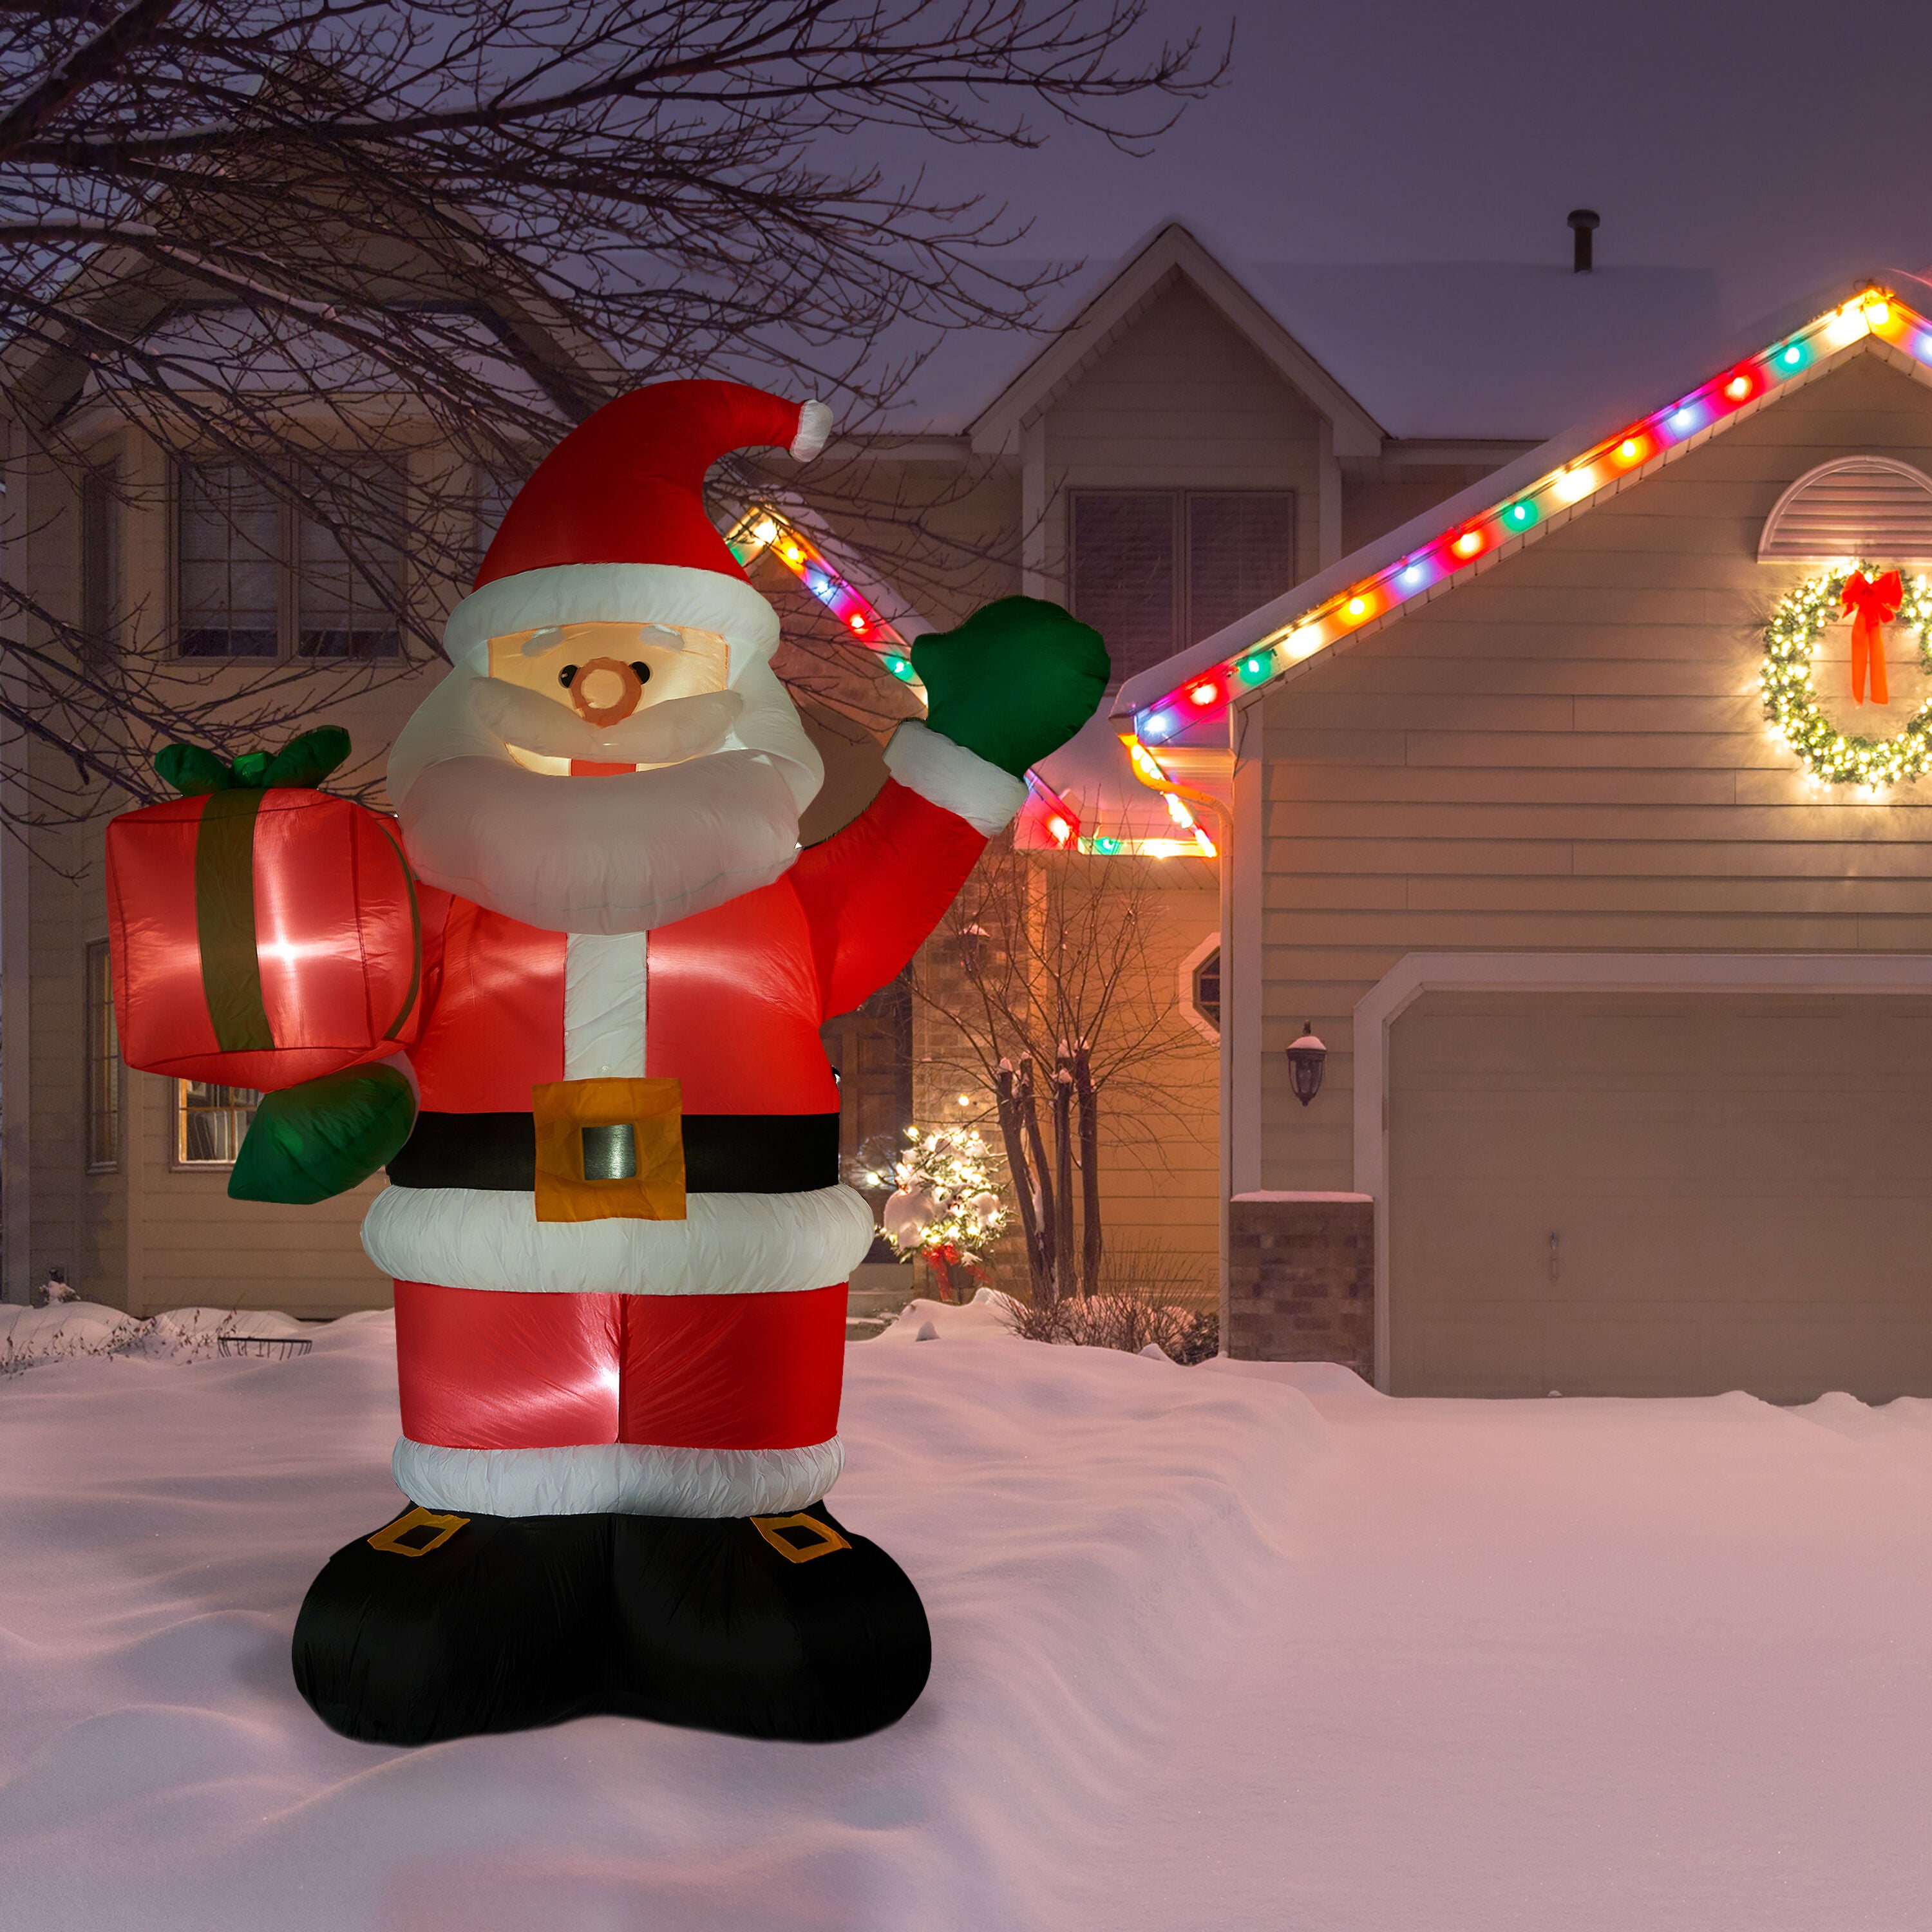 Fraser Hill Farm -  10-Ft. Tall Santa Claus Holding Gift, Outdoor Blow-Up Christmas Inflatable with Lights and Storage Bag